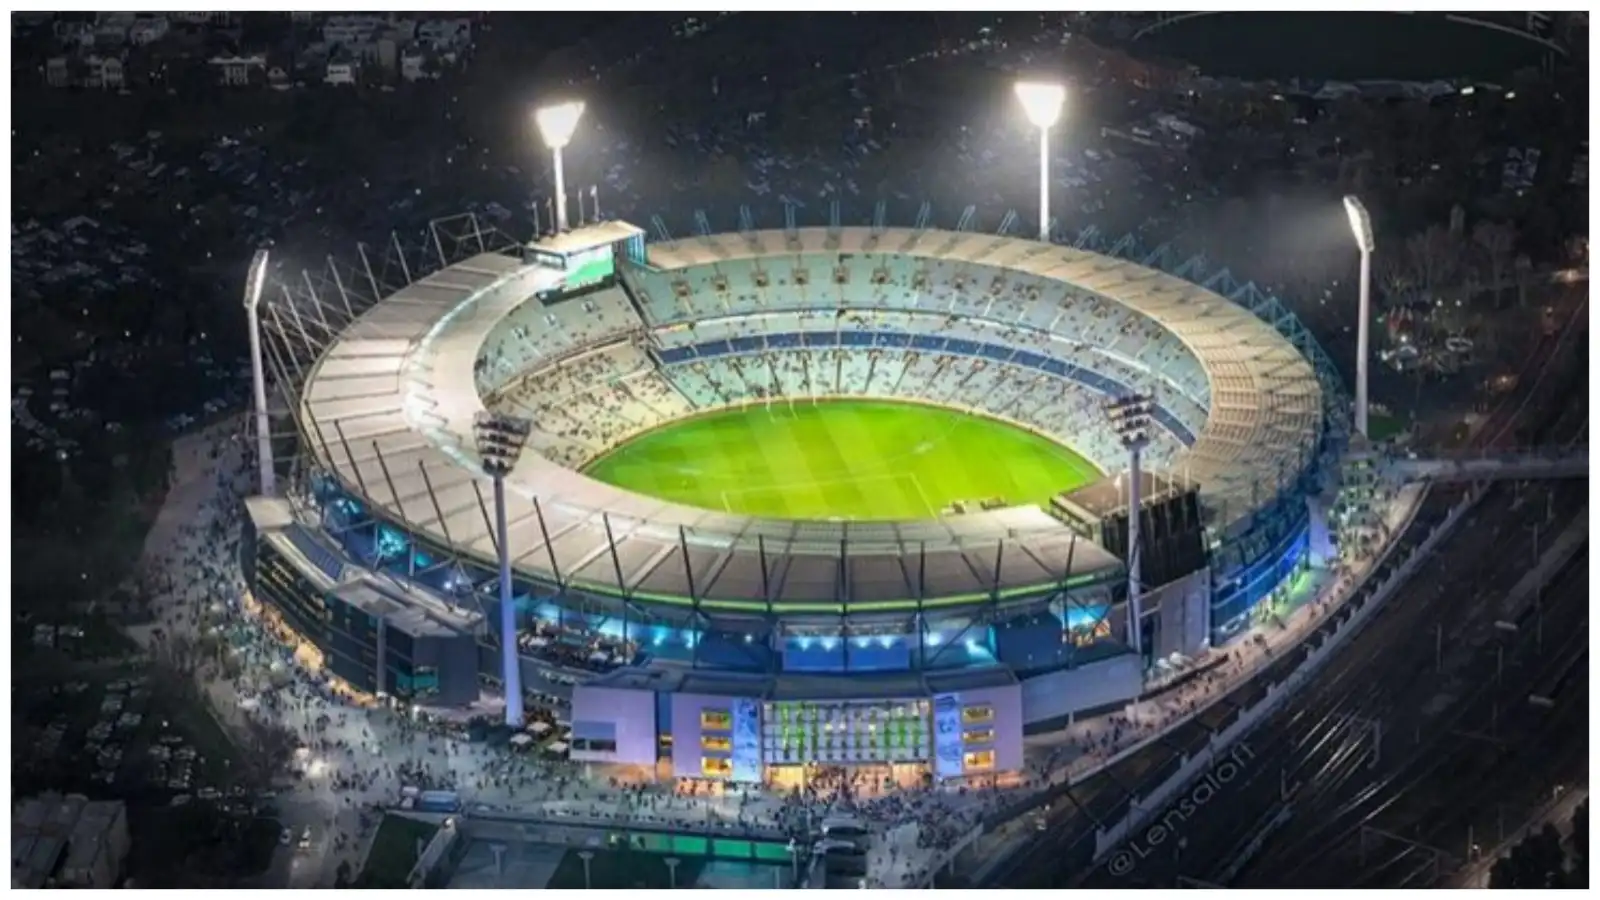 Melbourne Cricket Ground Boundary Length And Seating Capacity